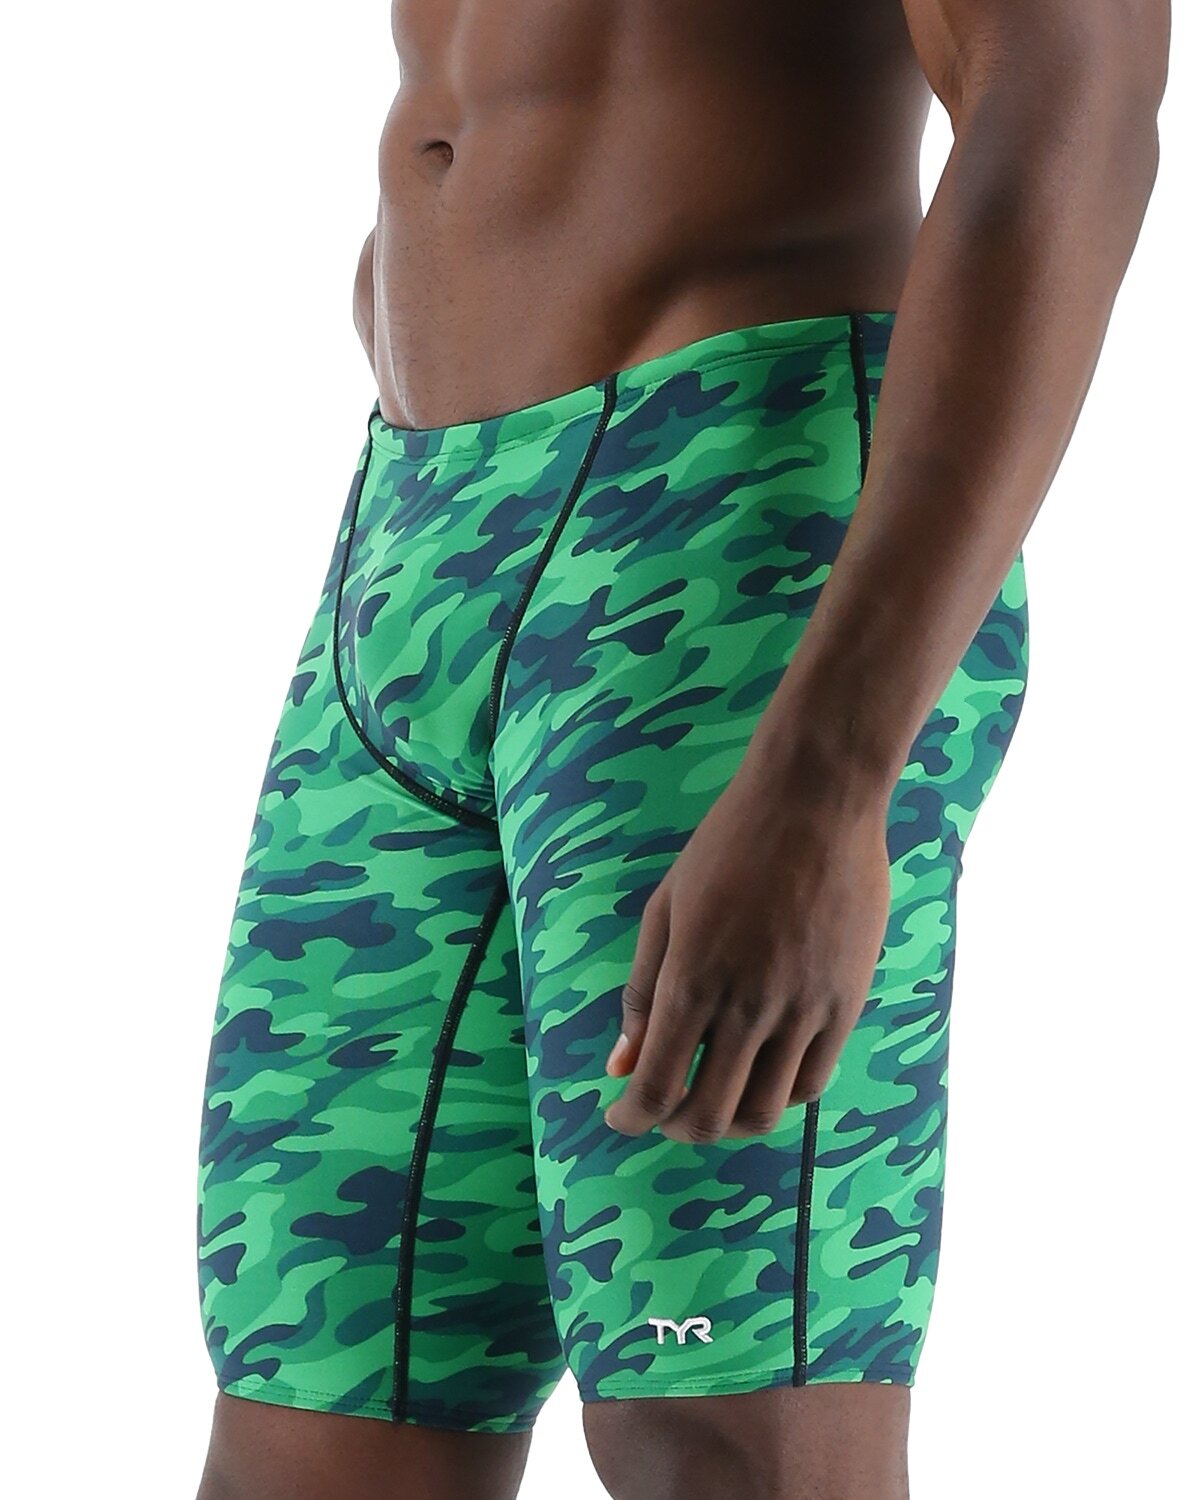 TYR Green Camo Jammer Size 28